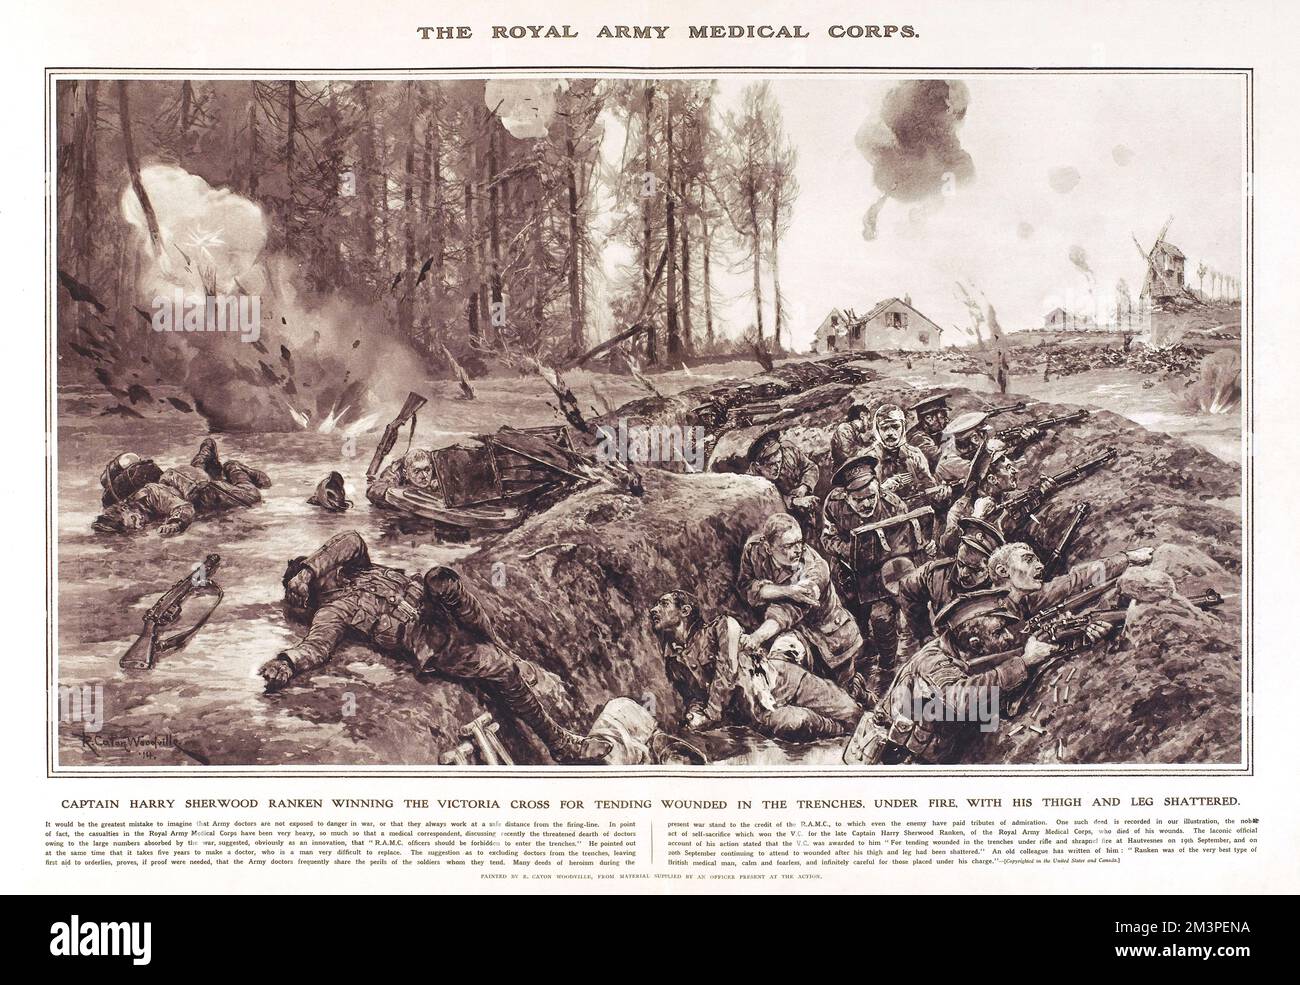 Captain Harry Sherwood Ranken of the Royal Army Medical Corps, winning the Victoria Cross for tending wounded soldiers in the trenches, under fire, with his thigh and leg shattered.  Reproduction of a painting by R Caton Woodville in Great War Deeds, a special panorama supplement produced by the Illustrated London News in 1915, featuring heroic actions of the First World War.      Date: 1915 Stock Photo